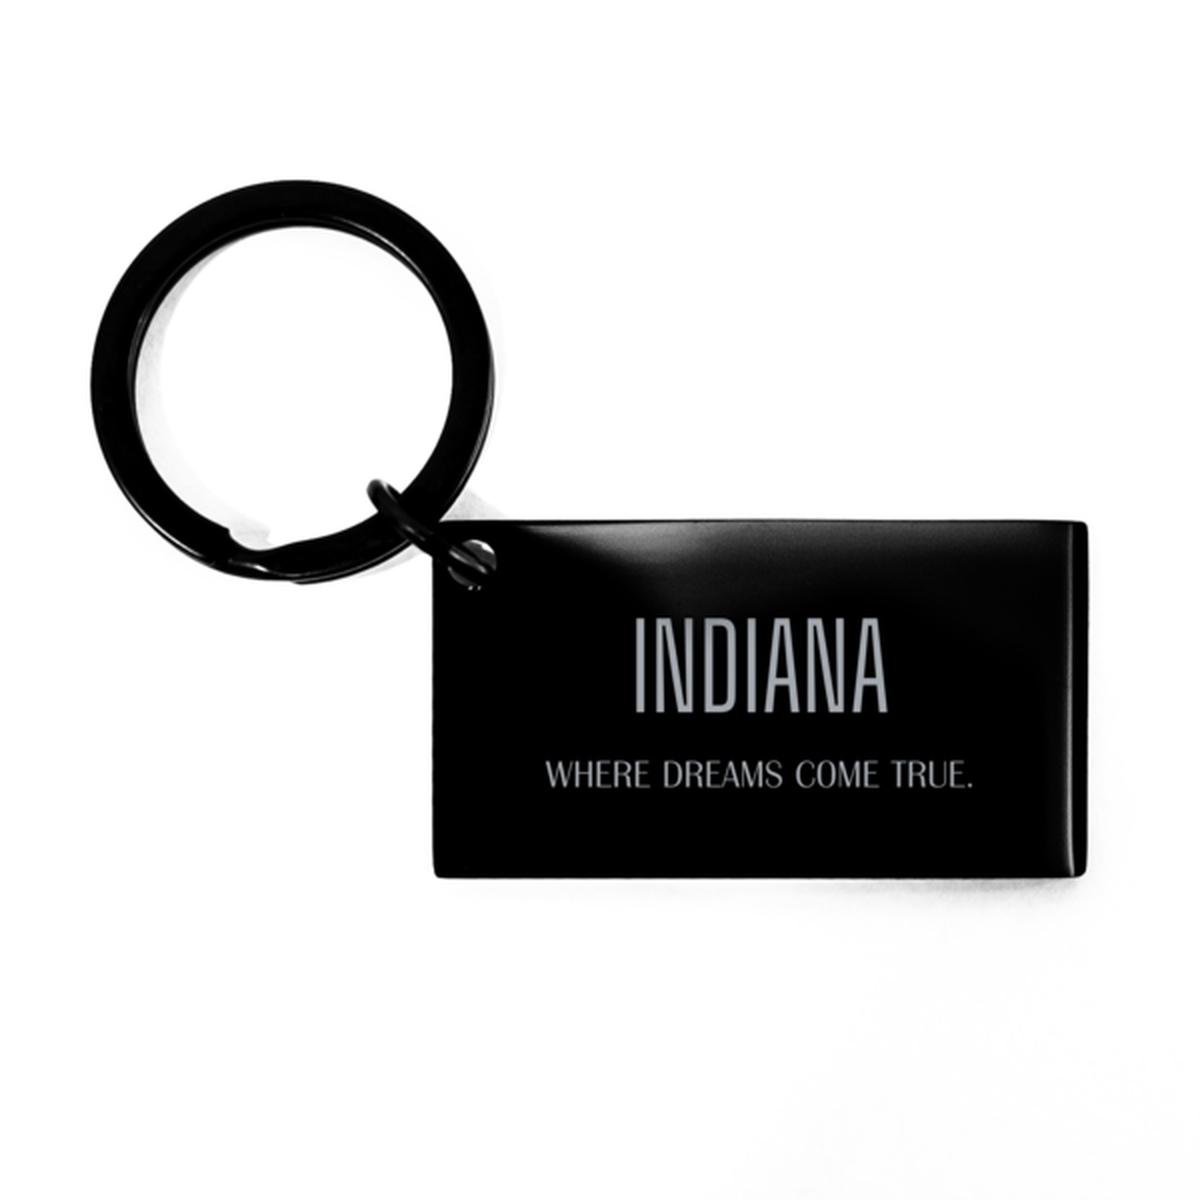 Love Indiana State Keychain, Indiana Where dreams come true, Birthday Inspirational Gifts For Indiana Men, Women, Friends